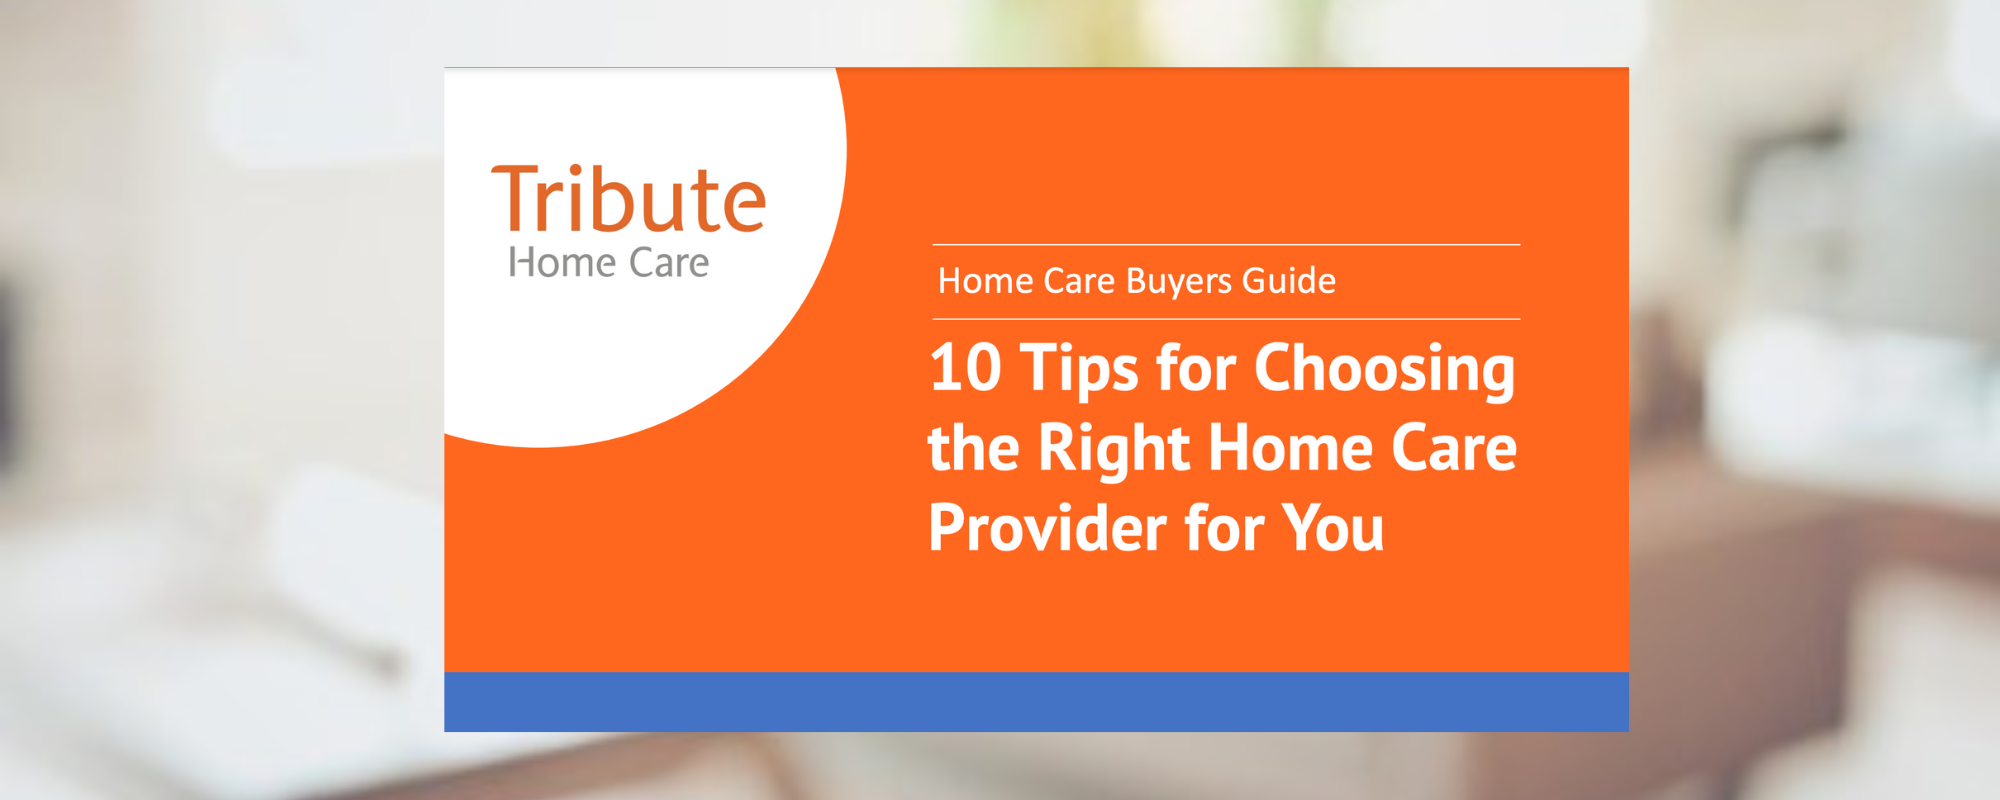 Home Care Buyers Guide